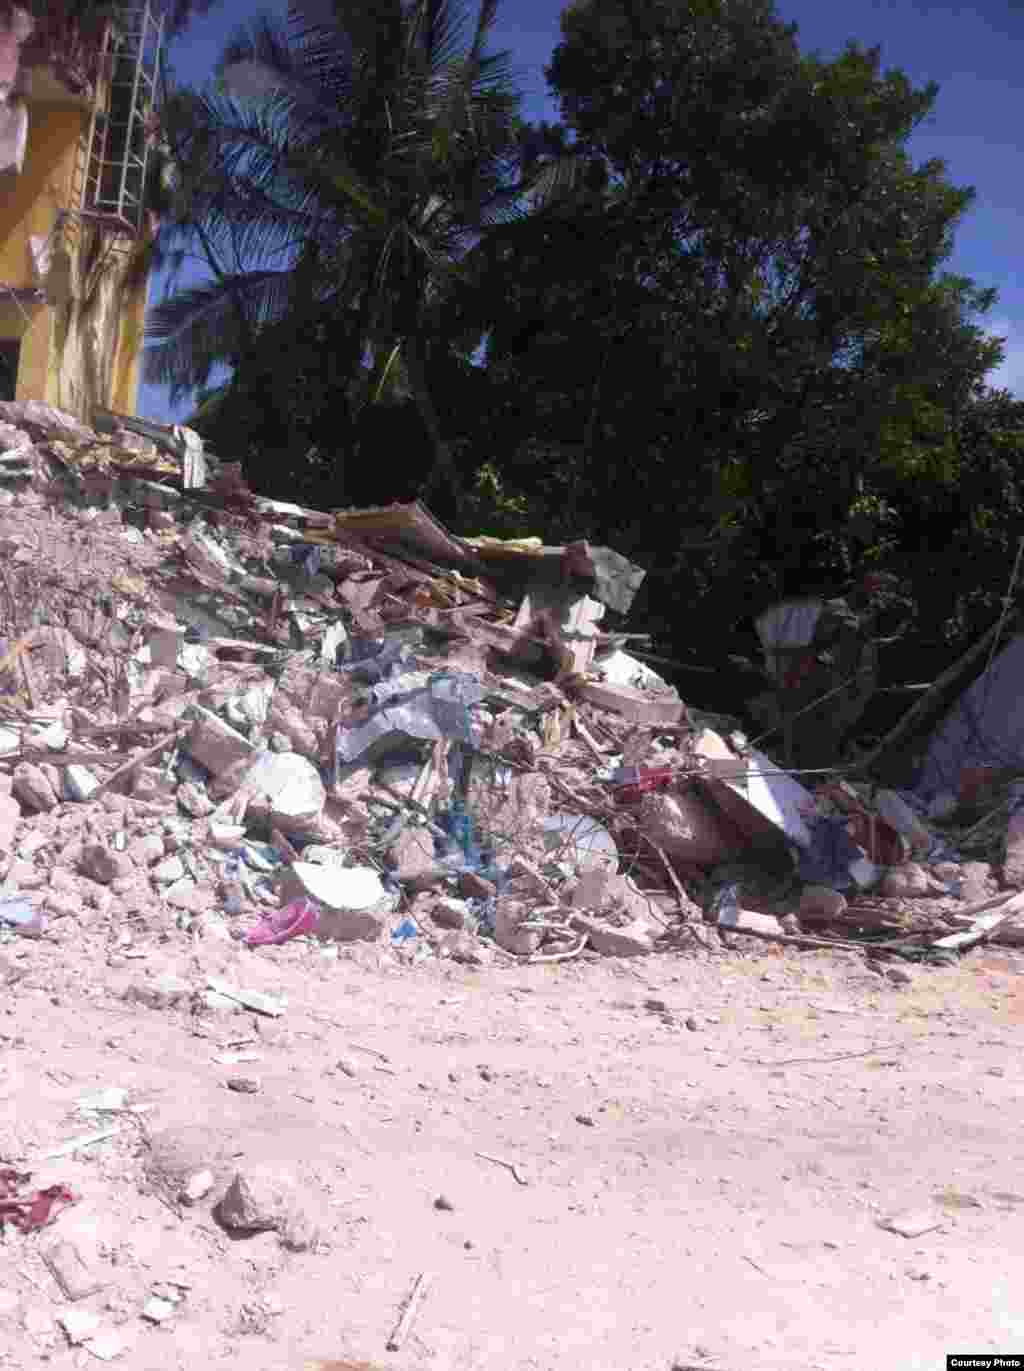 A photo, provided to VOA's Somali Service, shows the destruction of Naso-Hablod hotel and surrounding areas, in Mogadishu, Somalia, June 26, 2016. The photo was taken by a bystander who wished to remain anonymous.